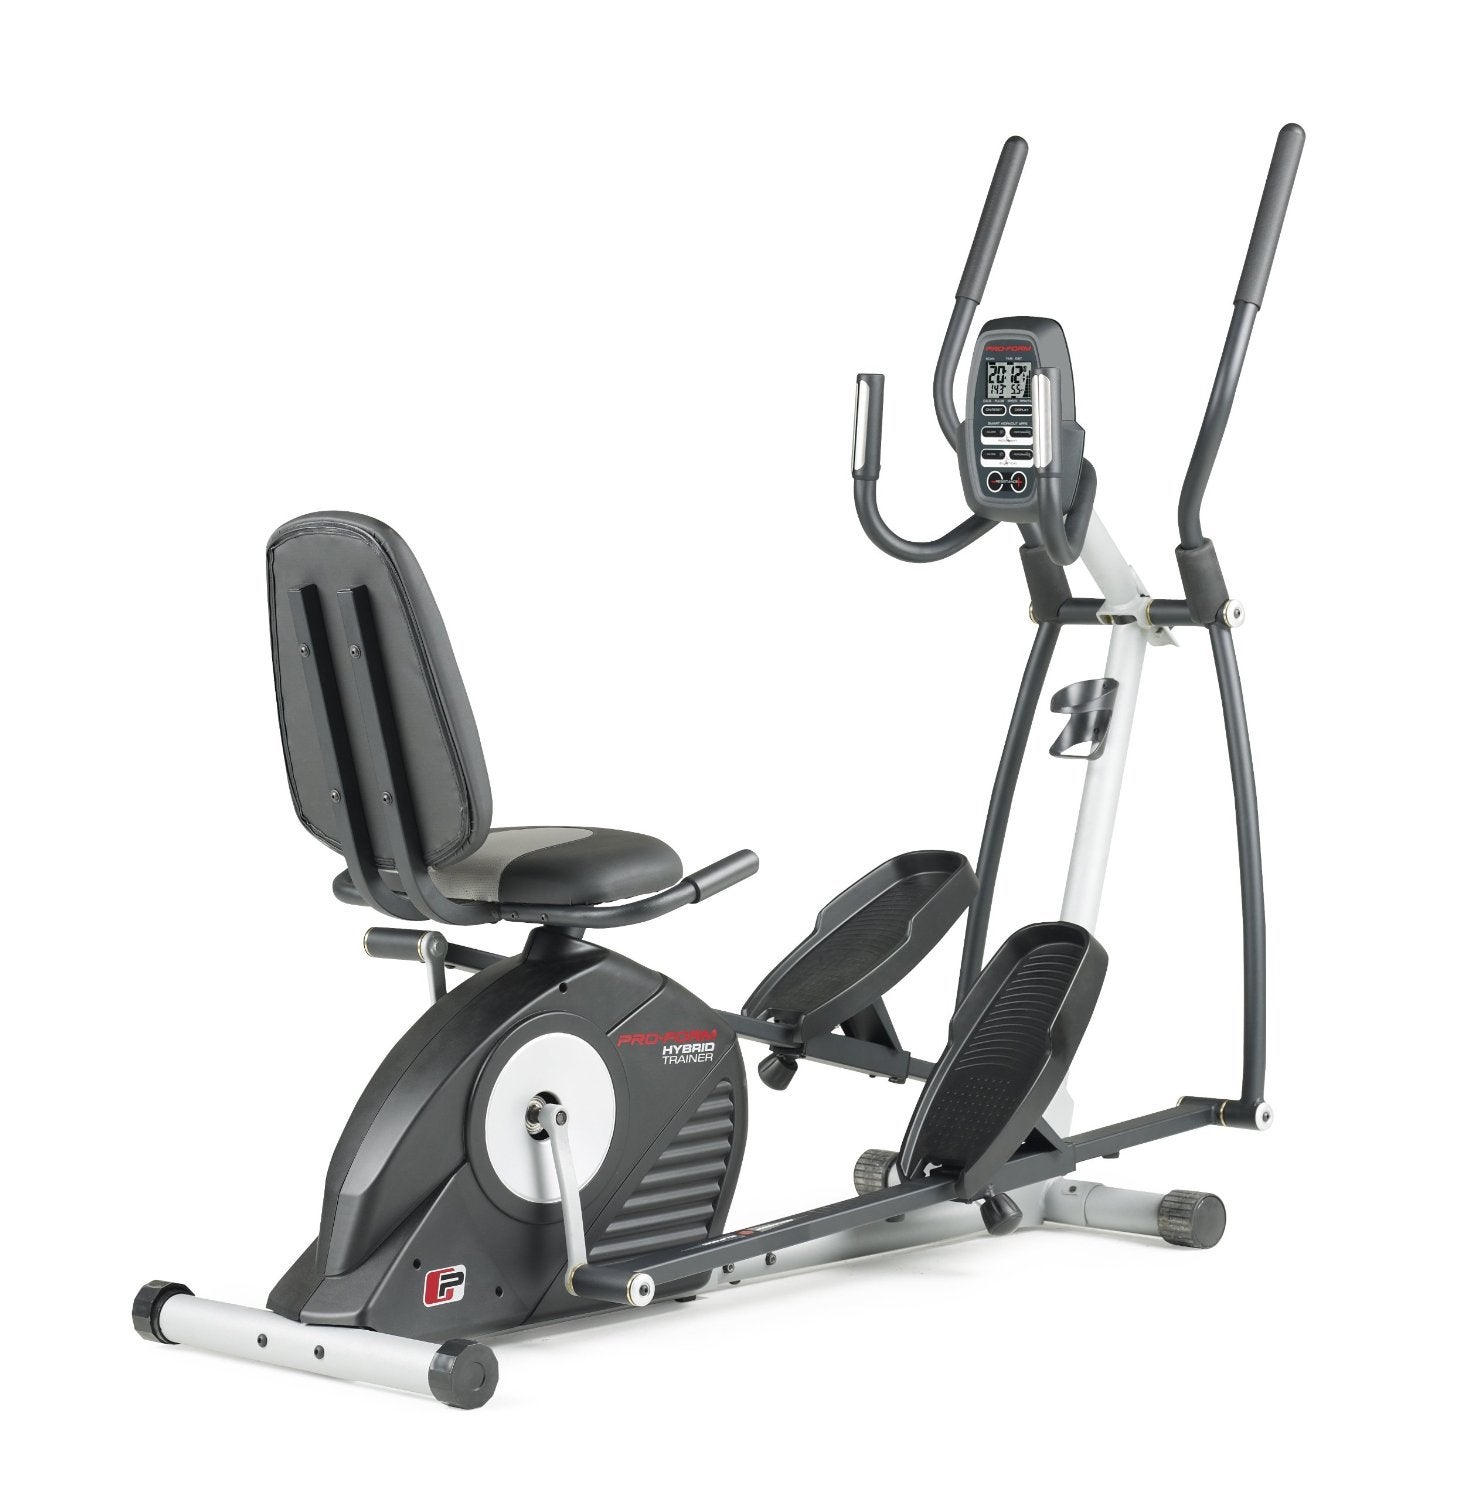 proform cycle trainer